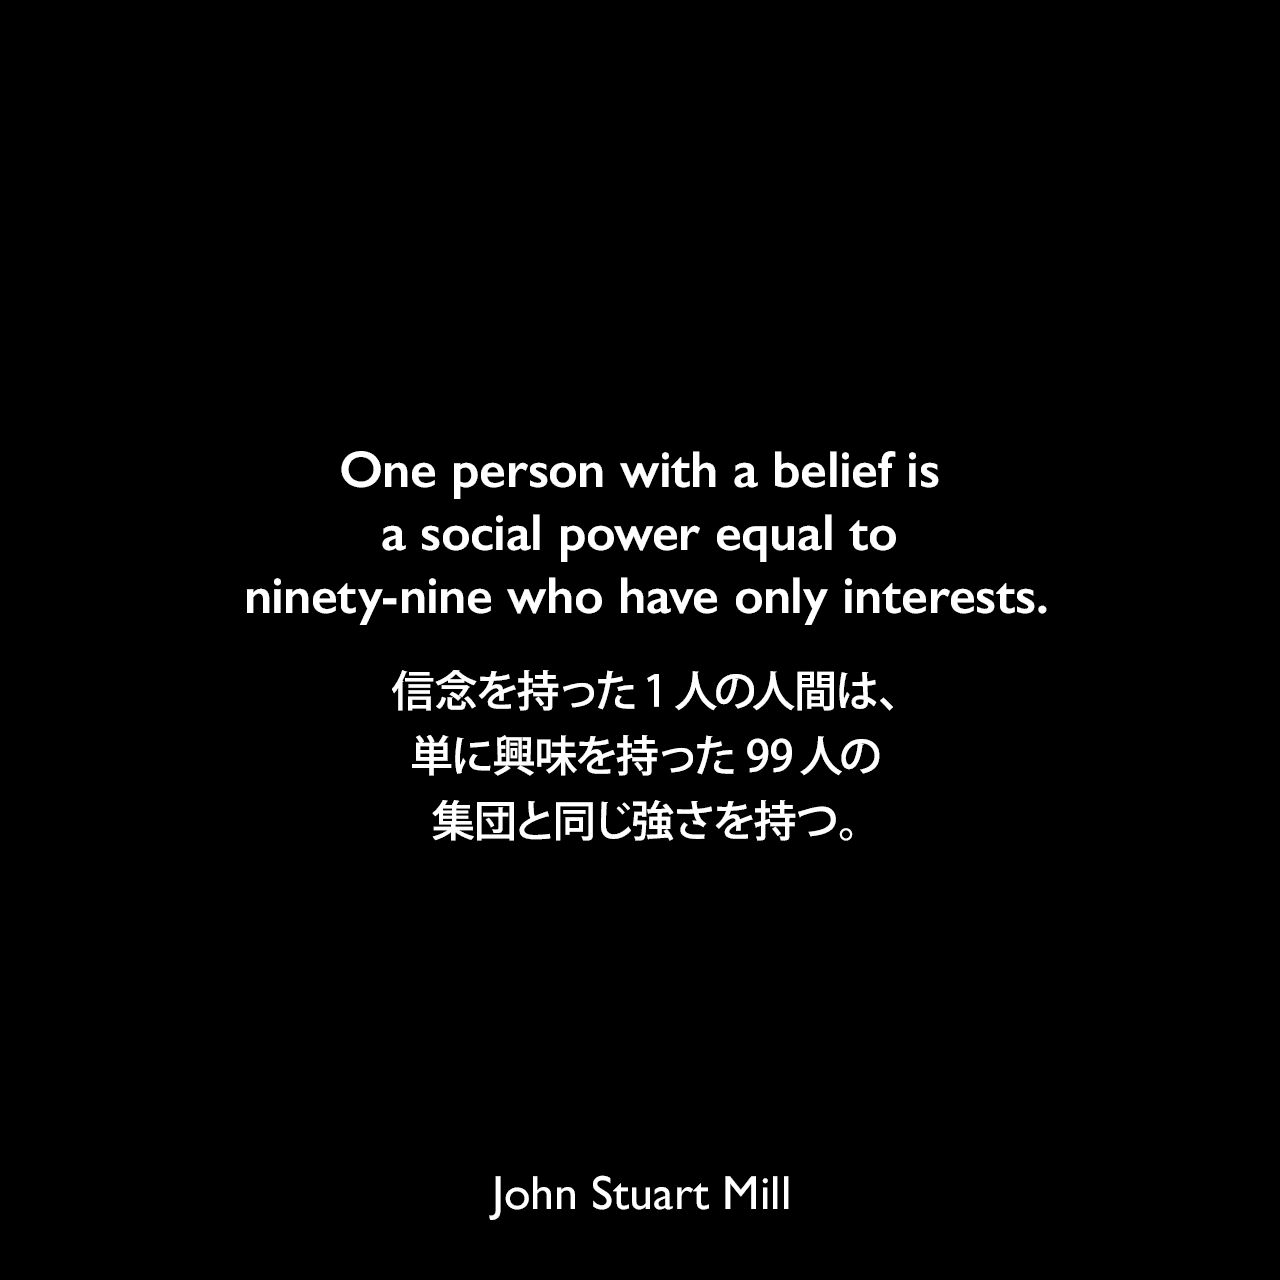 One person with a belief is a social power equal to ninety-nine who have only interests.信念を持った1人の人間は、単に興味を持った99人の集団と同じ強さを持つ。- ジョン・スチュアート・ミルによる本「代議制統治論」よりJohn Stuart Mill